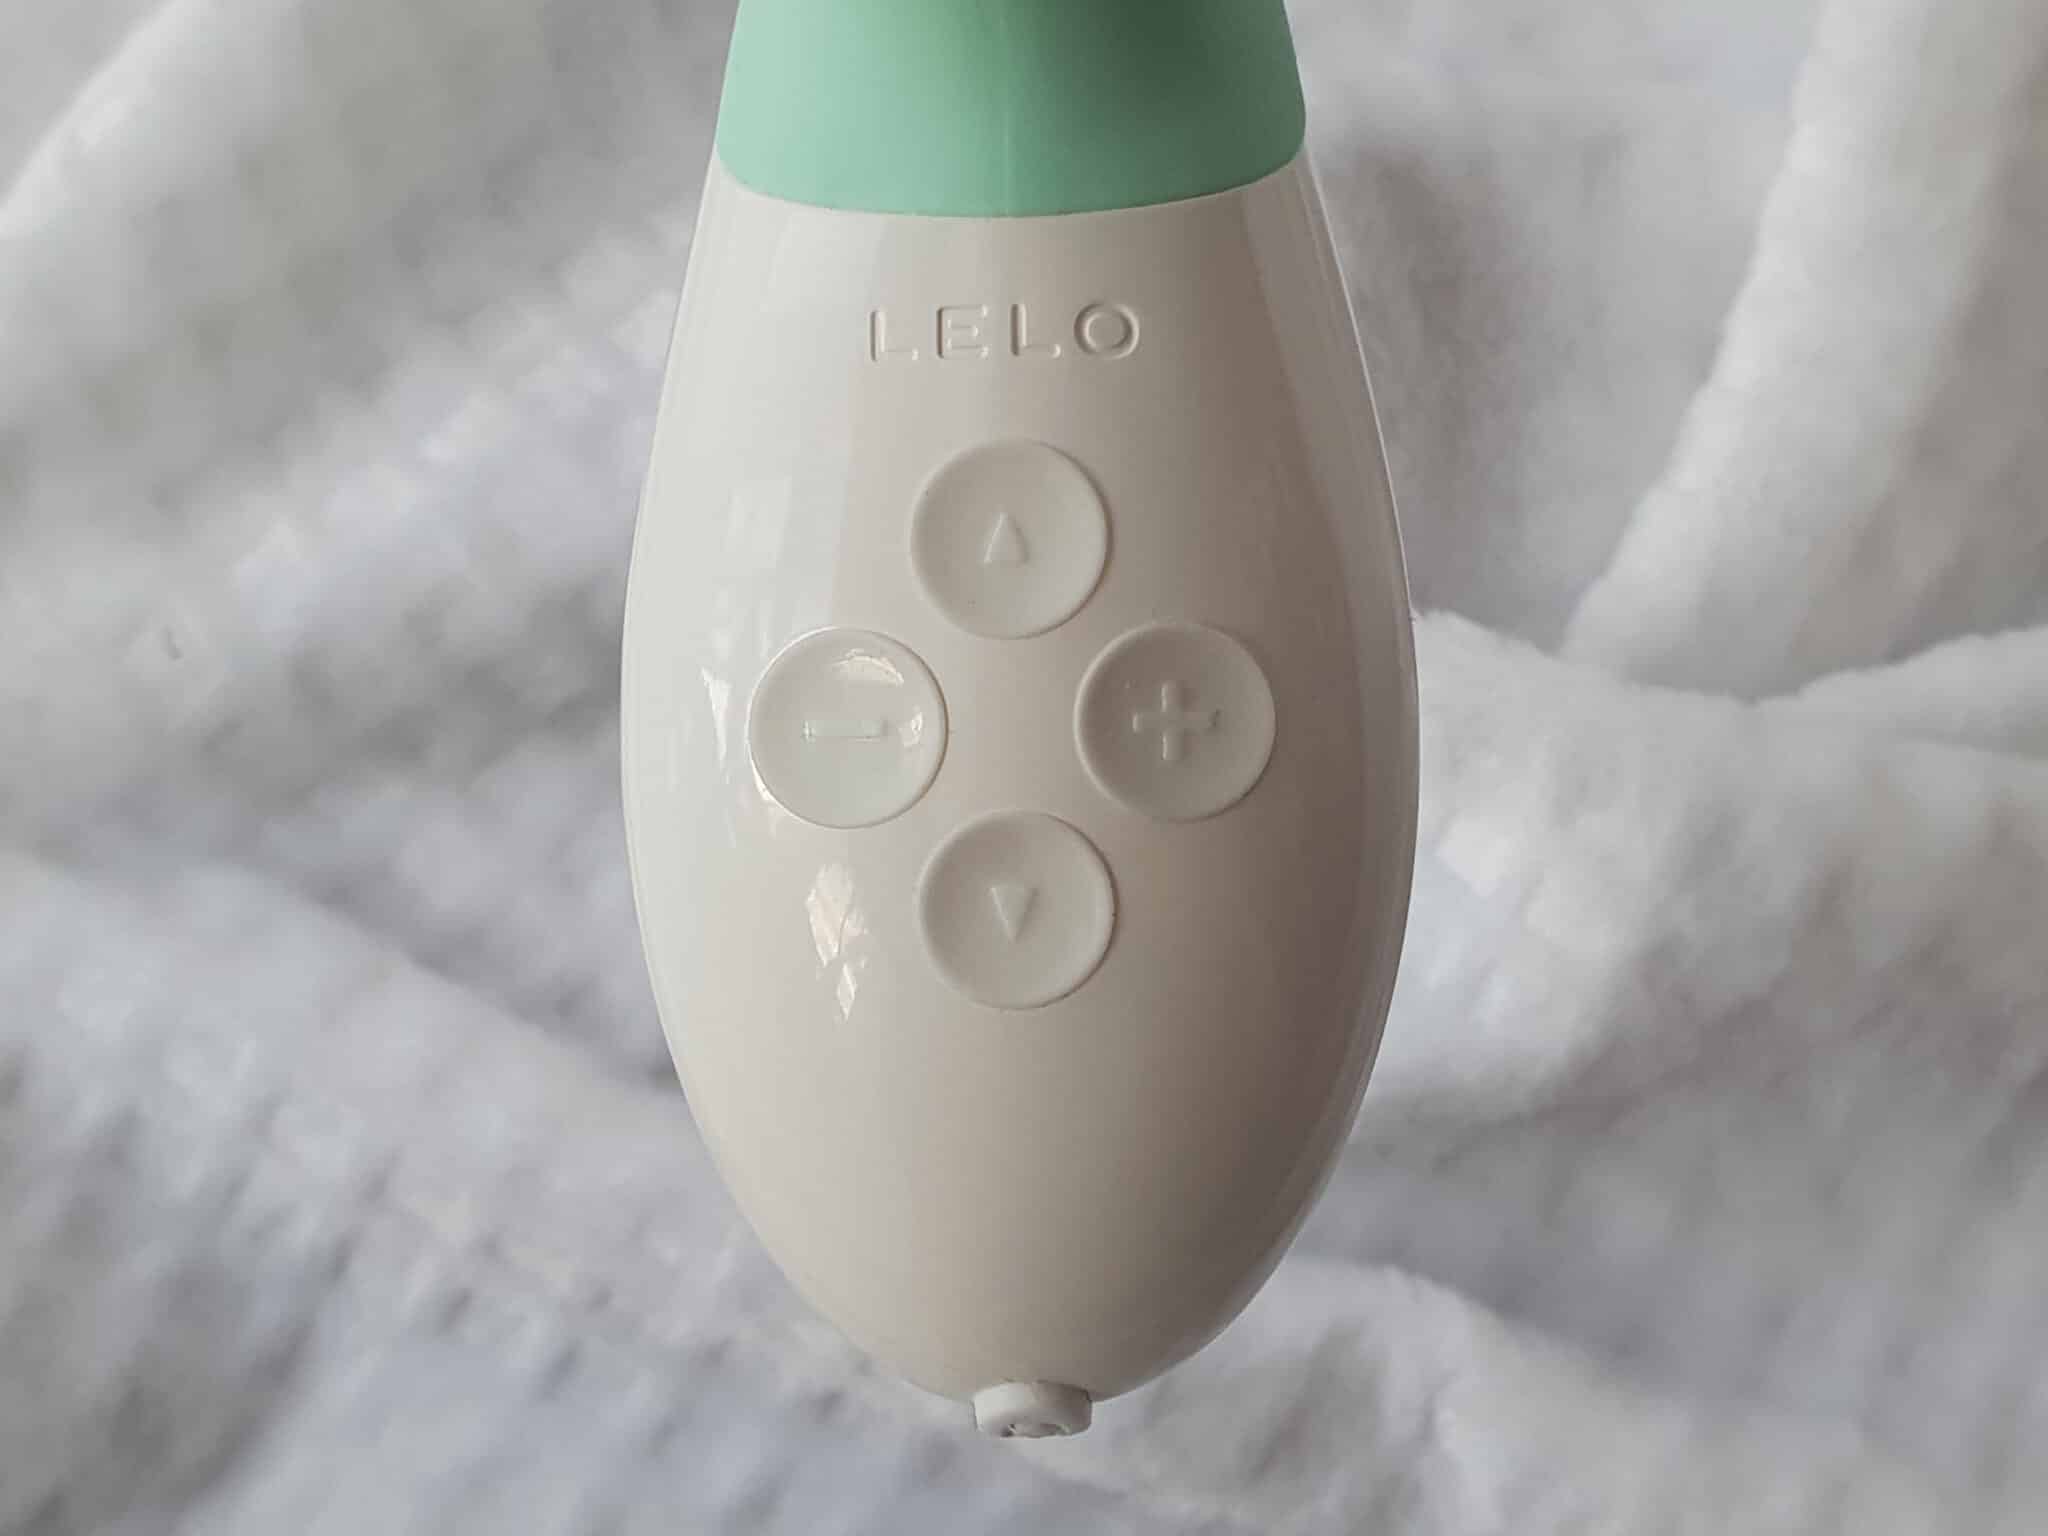 Lelo Ina 3 The Intuitiveness of the Lelo Ina 3: A Review